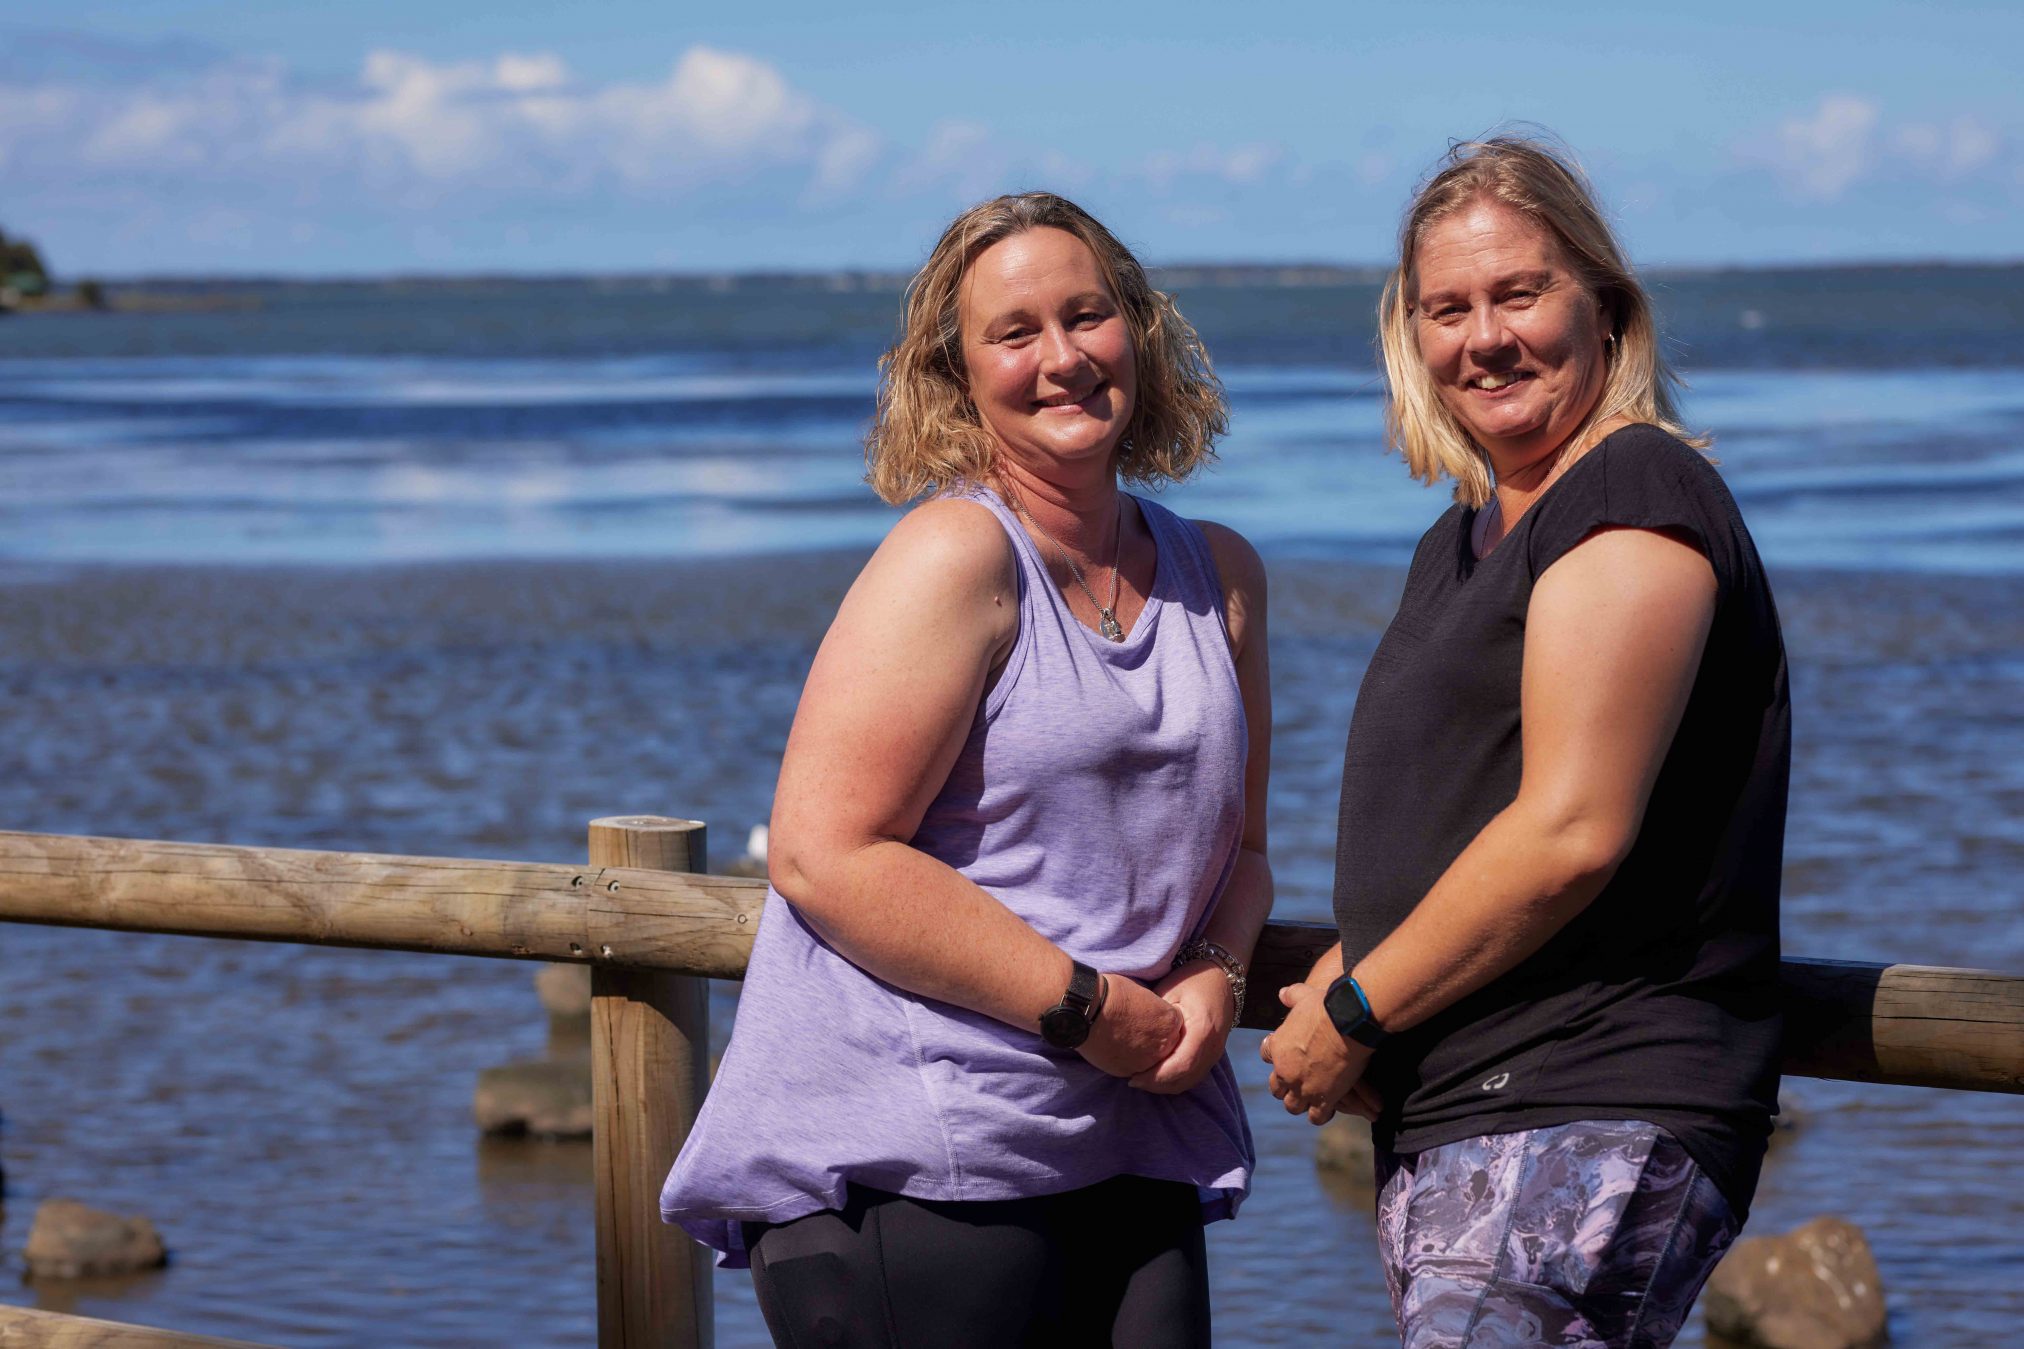 Two women smiling at the camera, there is a lake in the background.